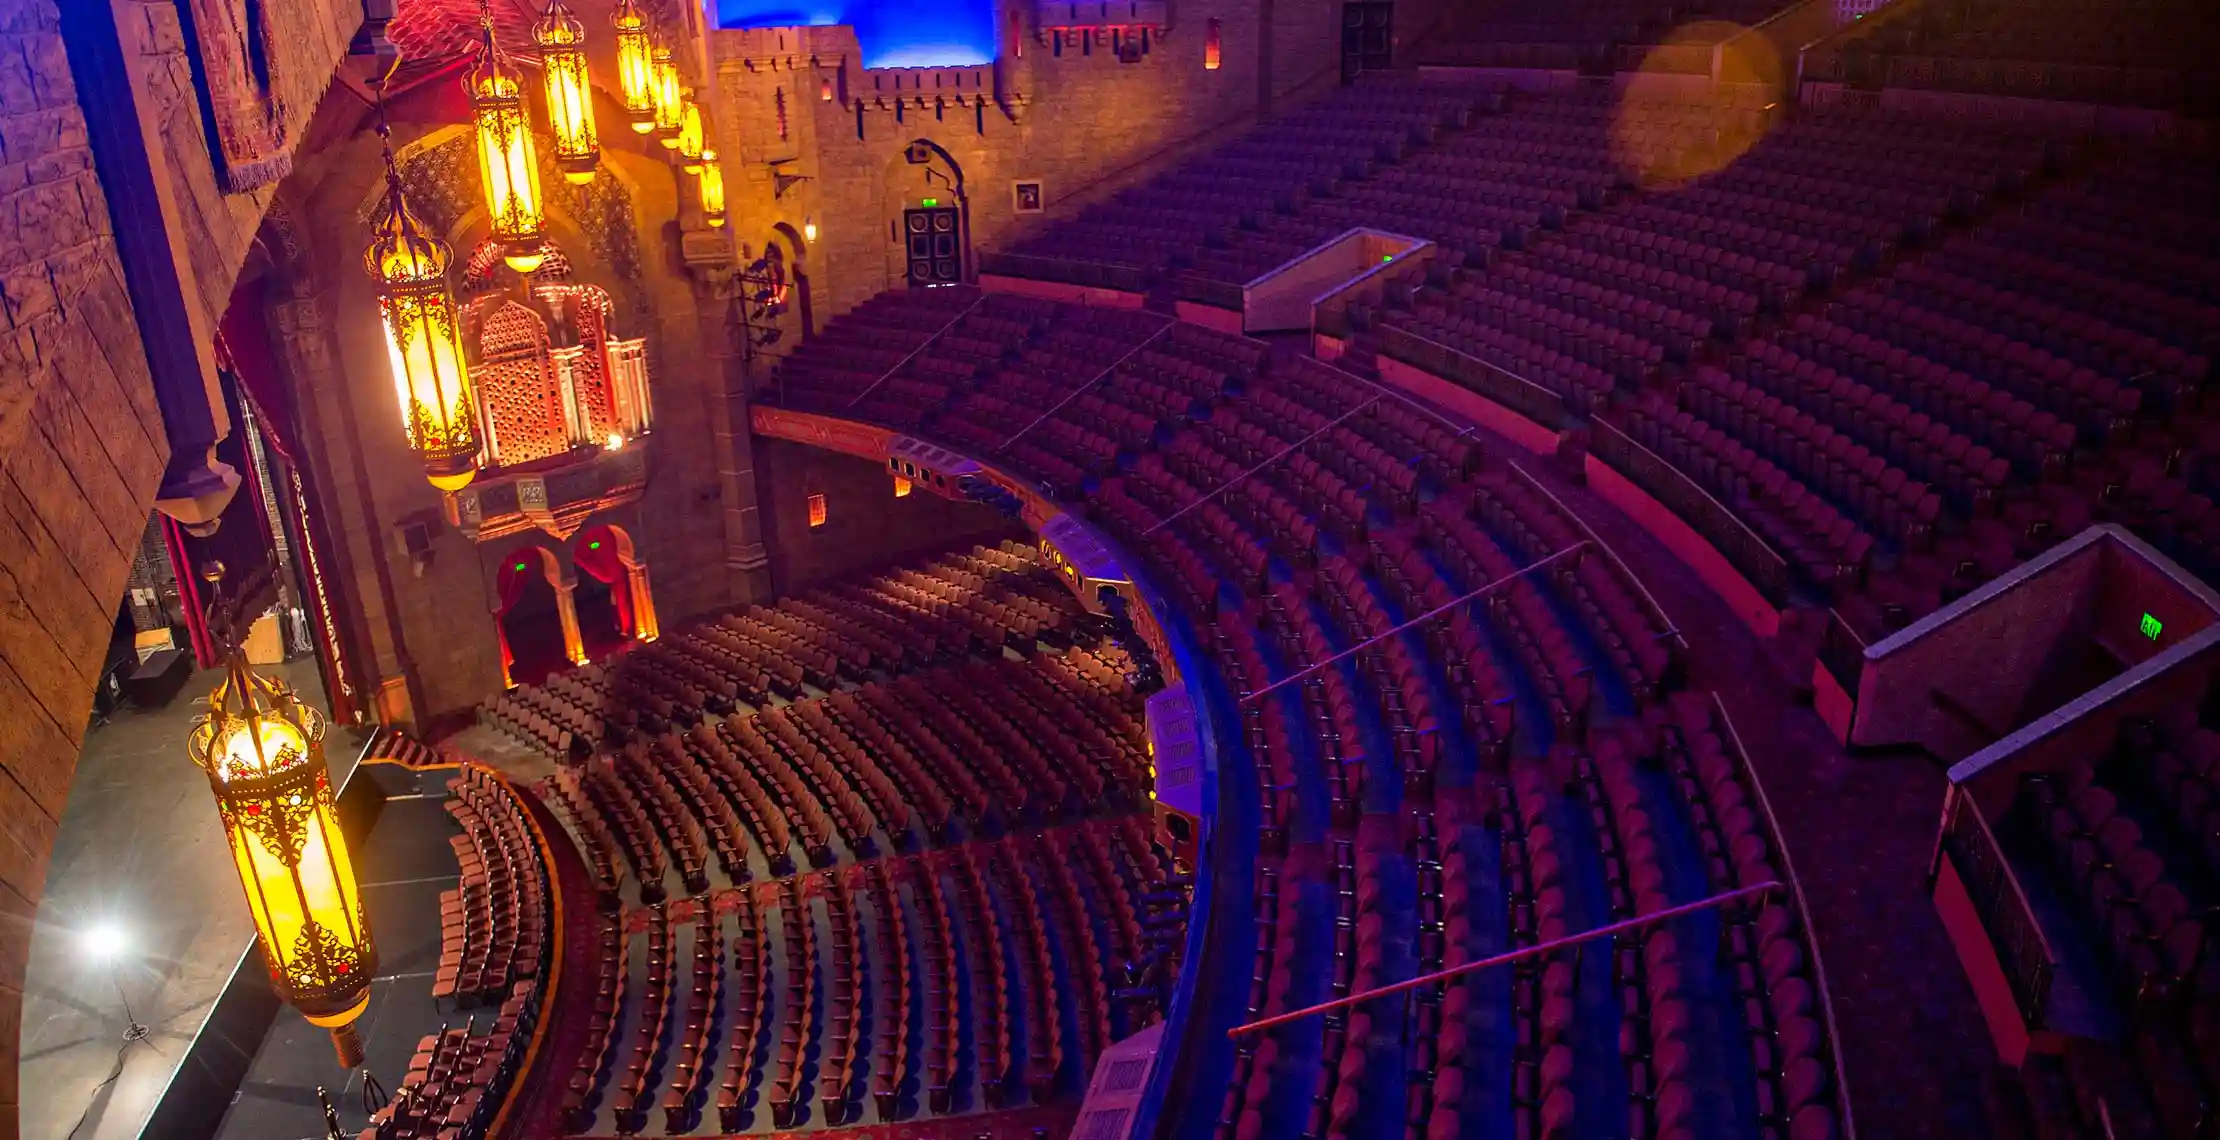 See a Broadway show at The Fox Theatre